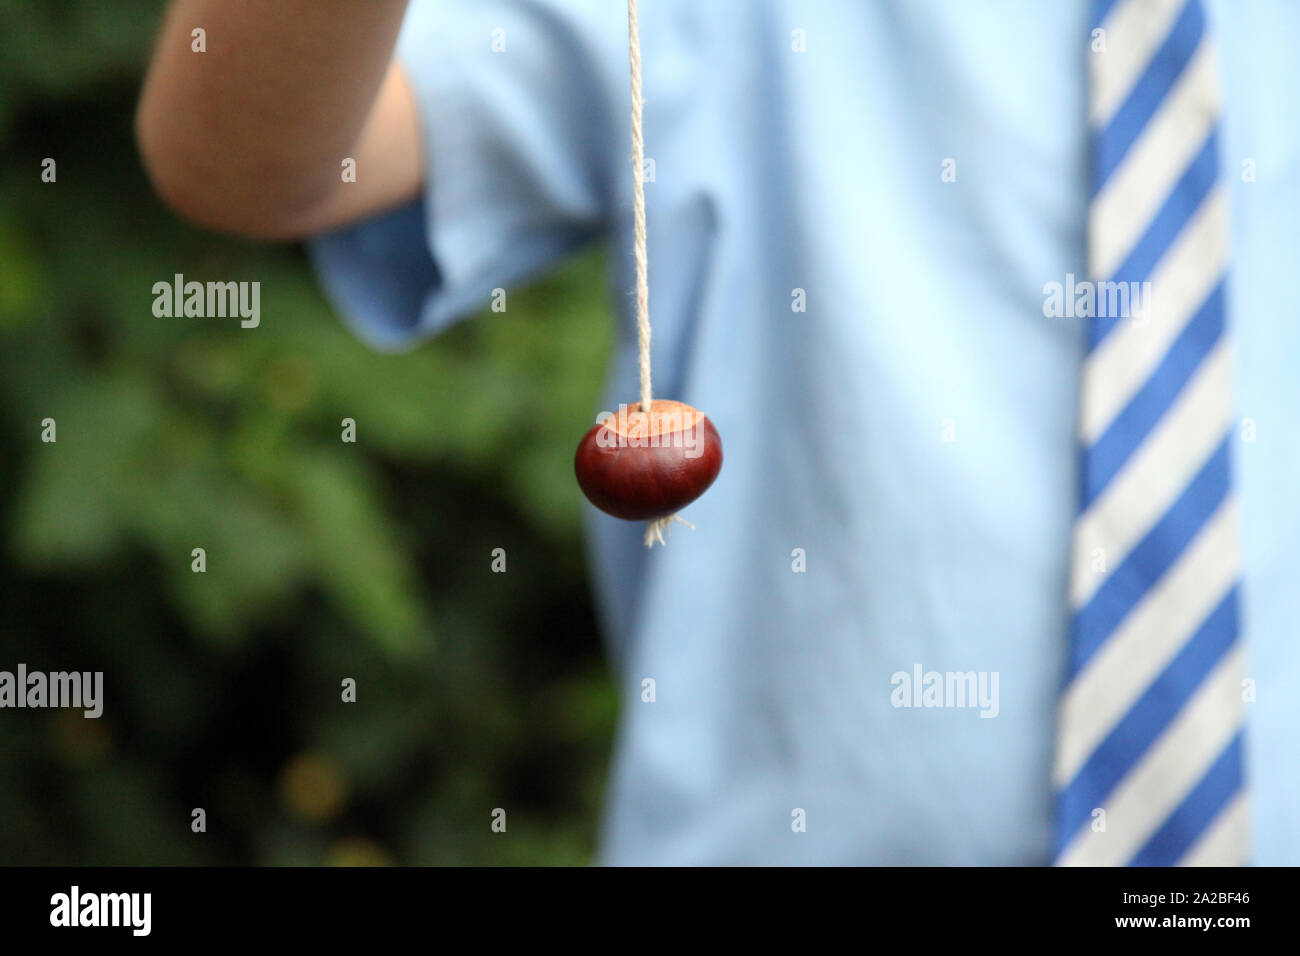 Primary schoolboy in school uniform playing a game of conkers, holding a conker on a string closeup, outside in Autumn Stock Photo